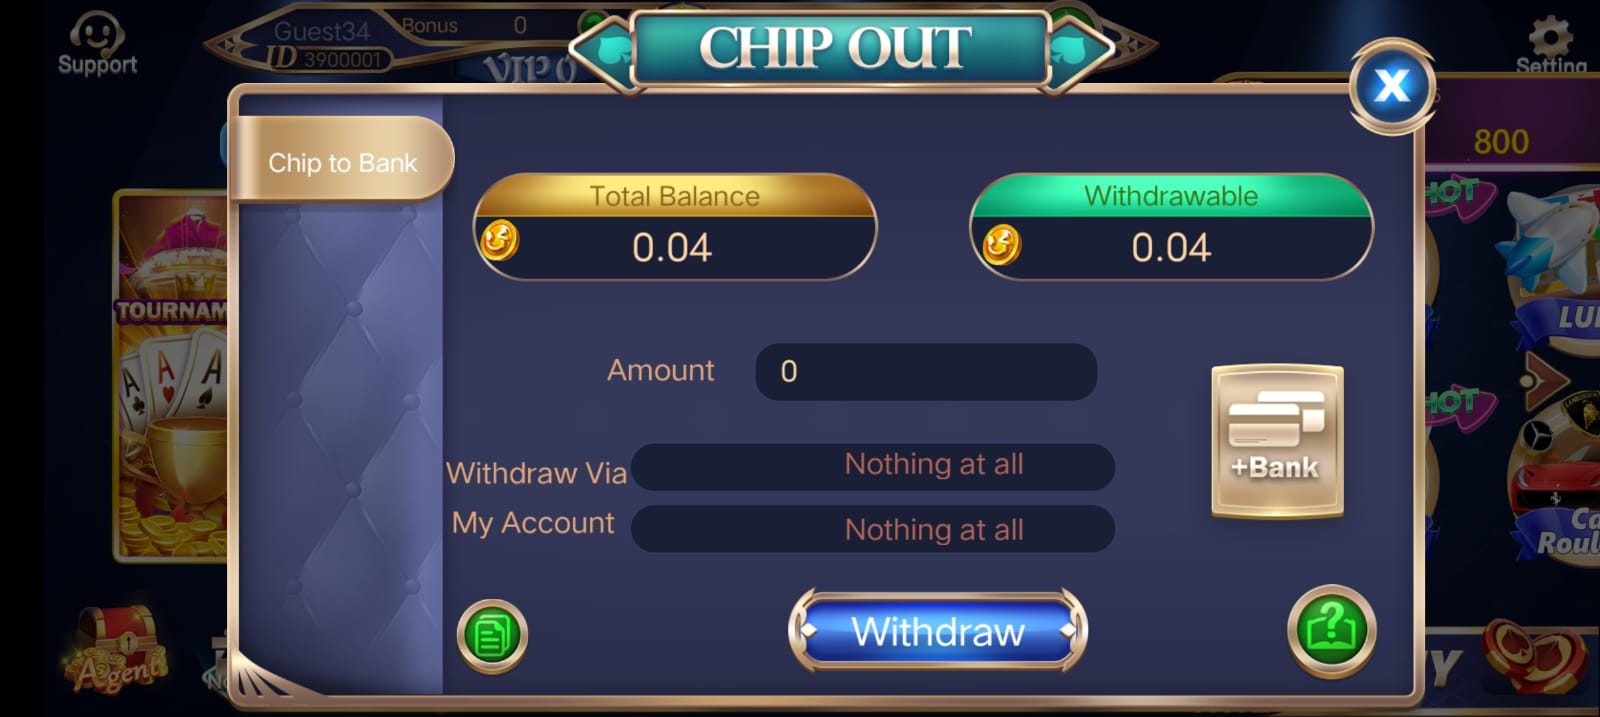 Withdrawal Money In Teen Patti Go Application